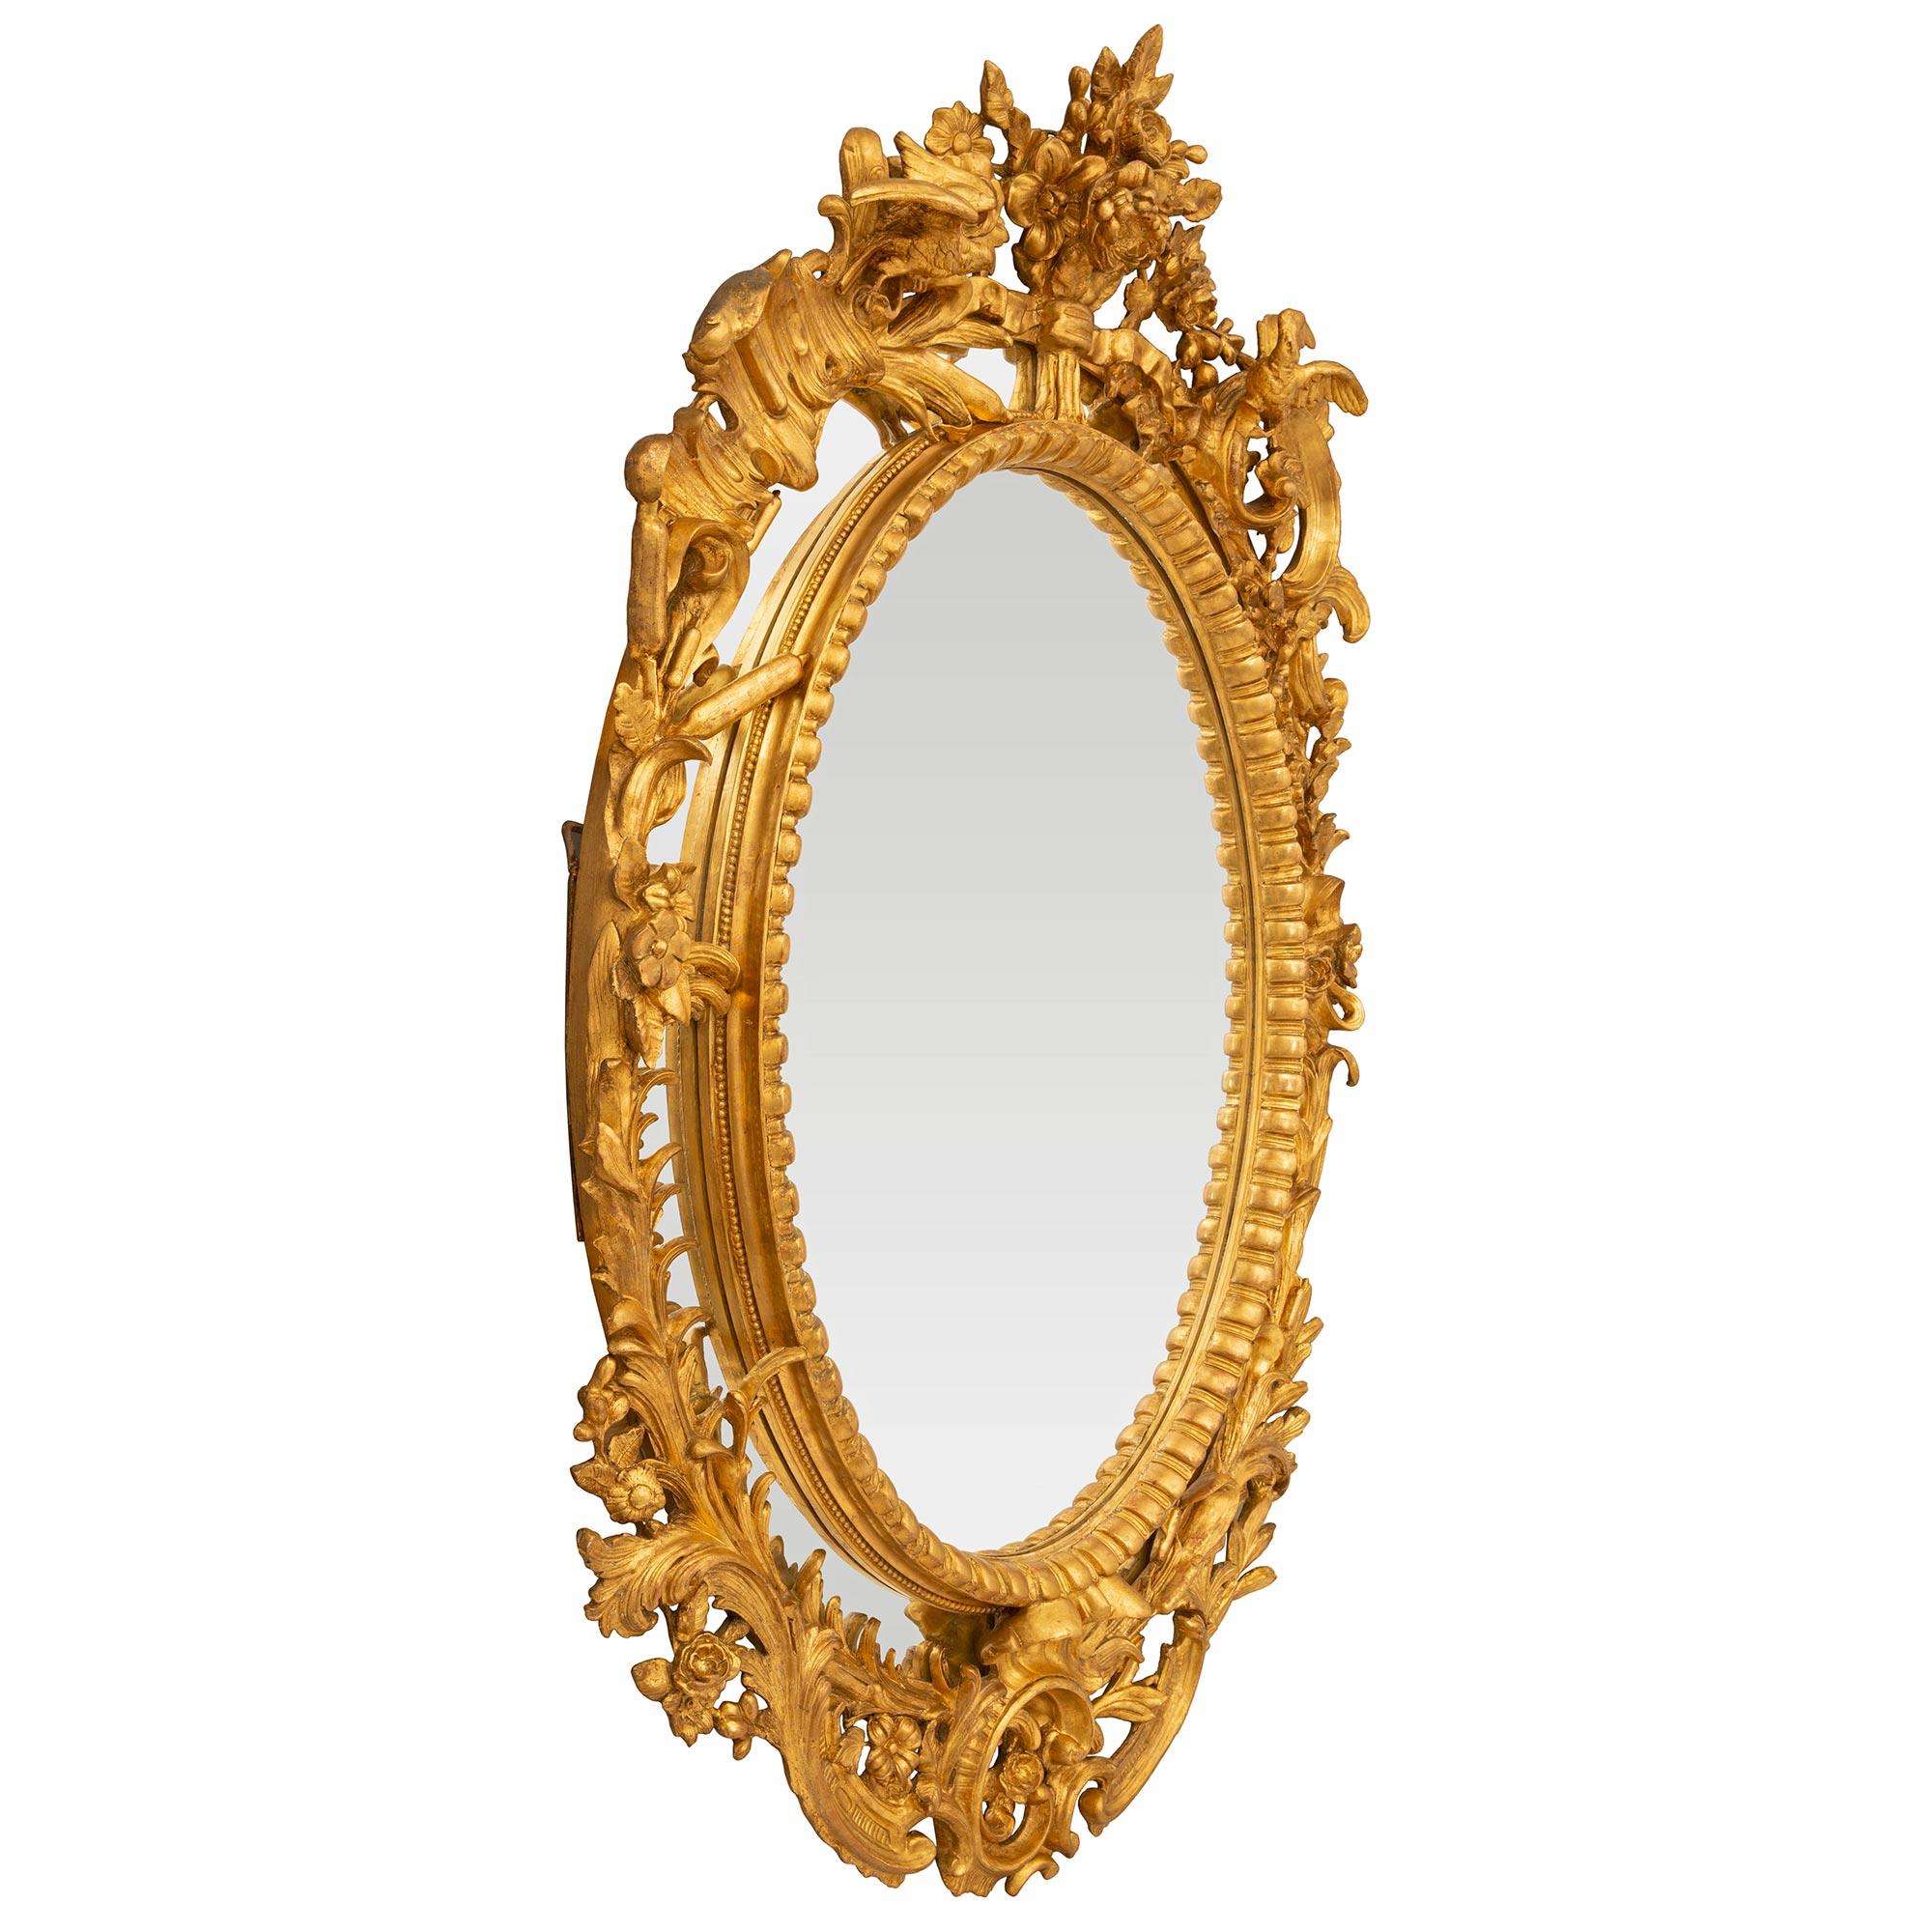 A stunning and most impressive French 19th century Louis XV st. double framed giltwood mirror. The large scale oval mirror retains all of its original mirror plates throughout with the central mirror plate framed within an elegant wrap around reeded